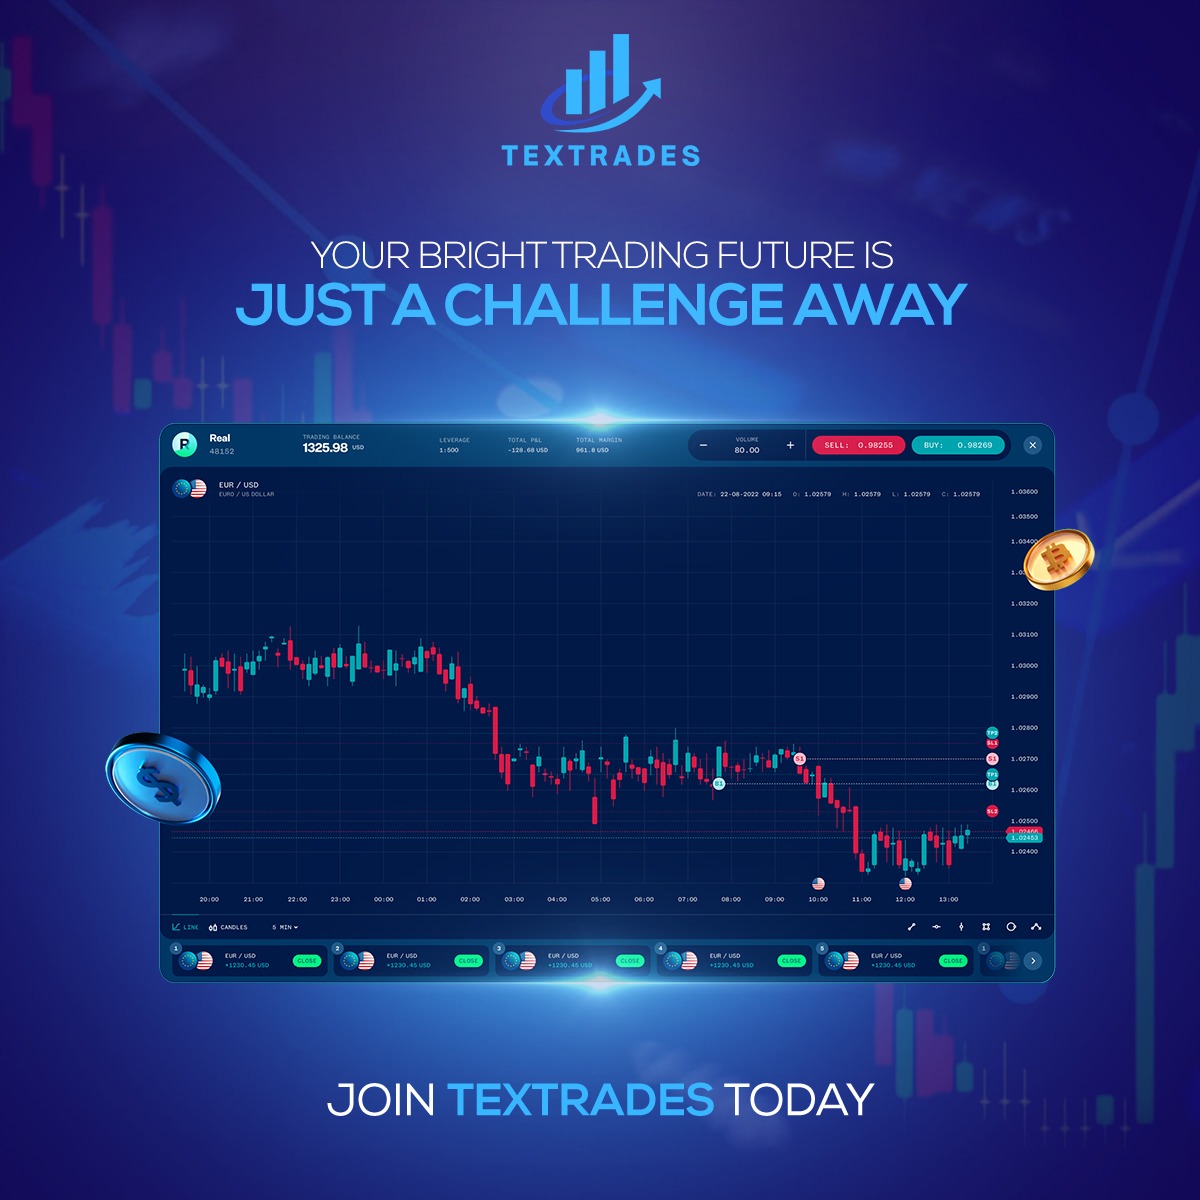 Textrades is just one click away from you. Now you can have funding opportunities with just one click. 📈💰
Don't miss out on this chance to turn your skills into success. Visit our platform now and take the leap towards your trading goals! 

#TexTrades #FundingOpportunities…